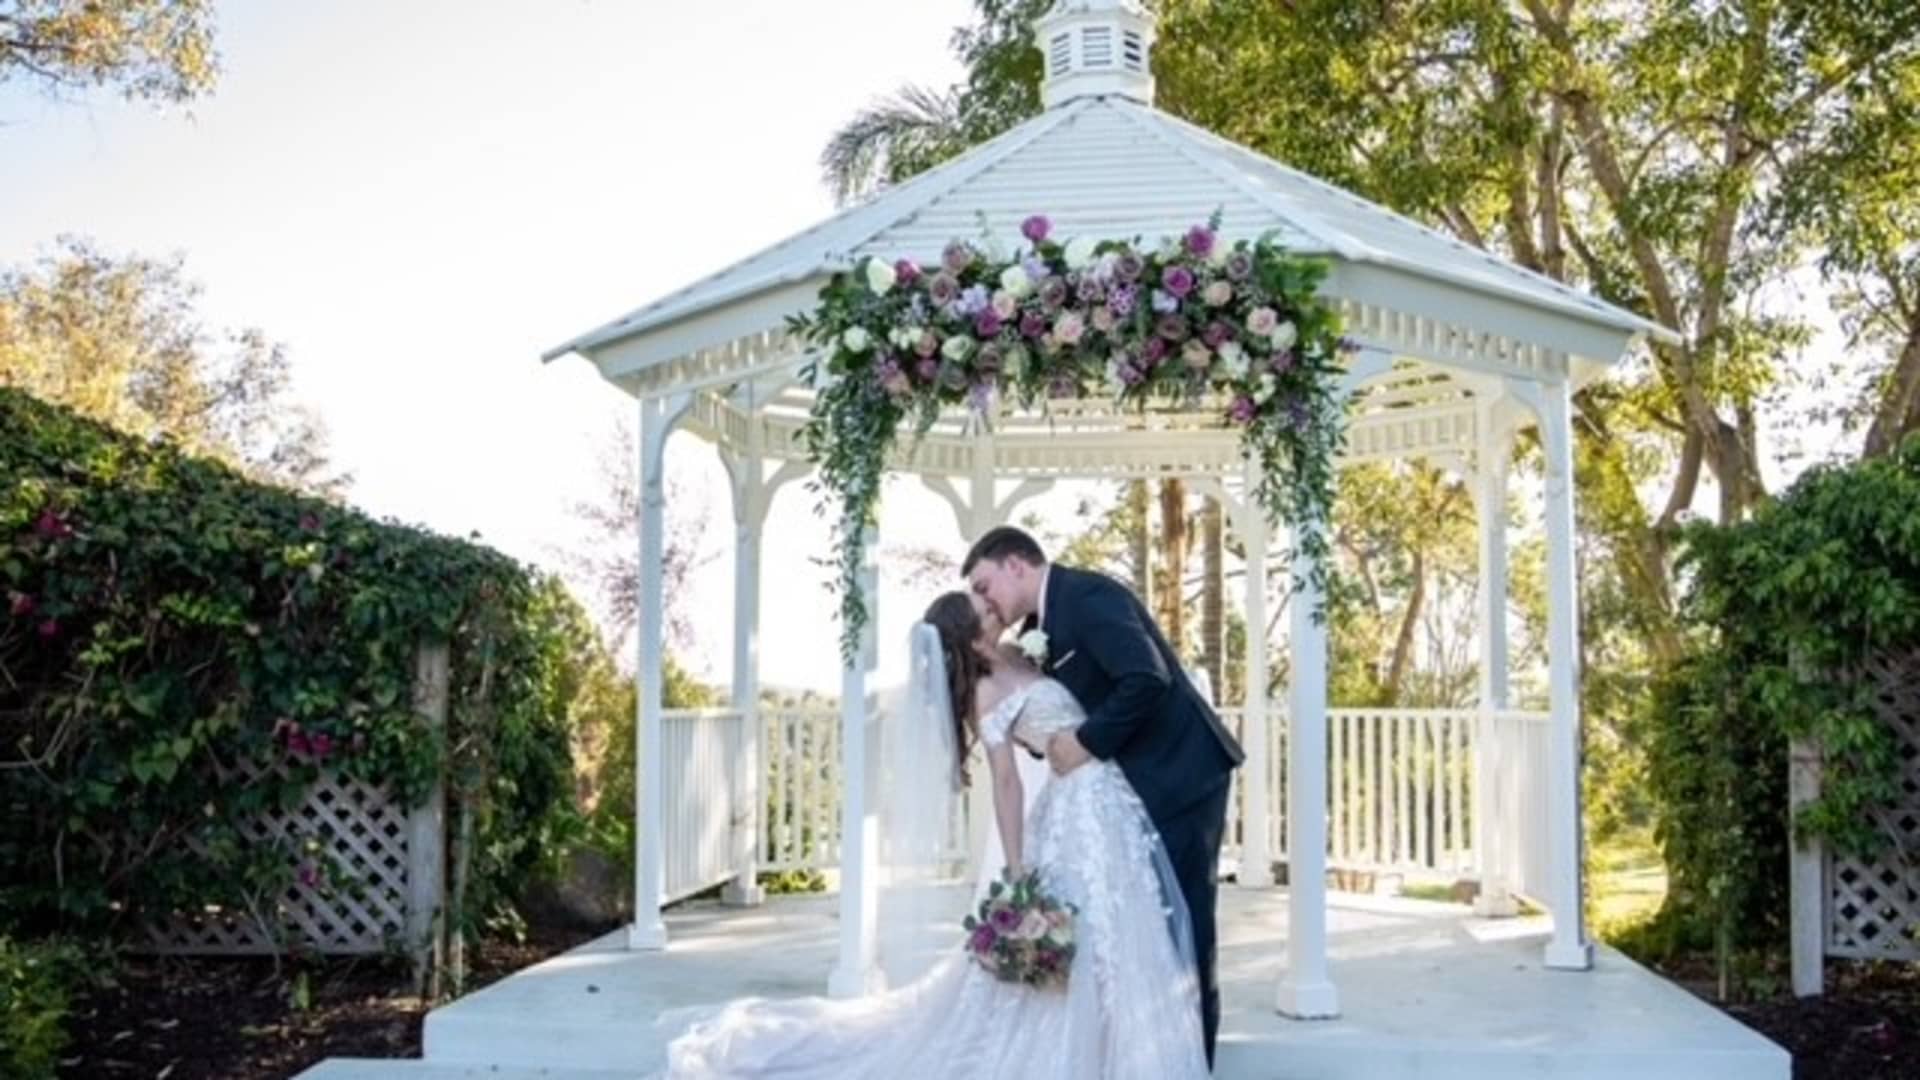 Morwood says her savings from Poshmark made her dream wedding possible: Less concerned about money, she could invite more guests and splurge on decorations.